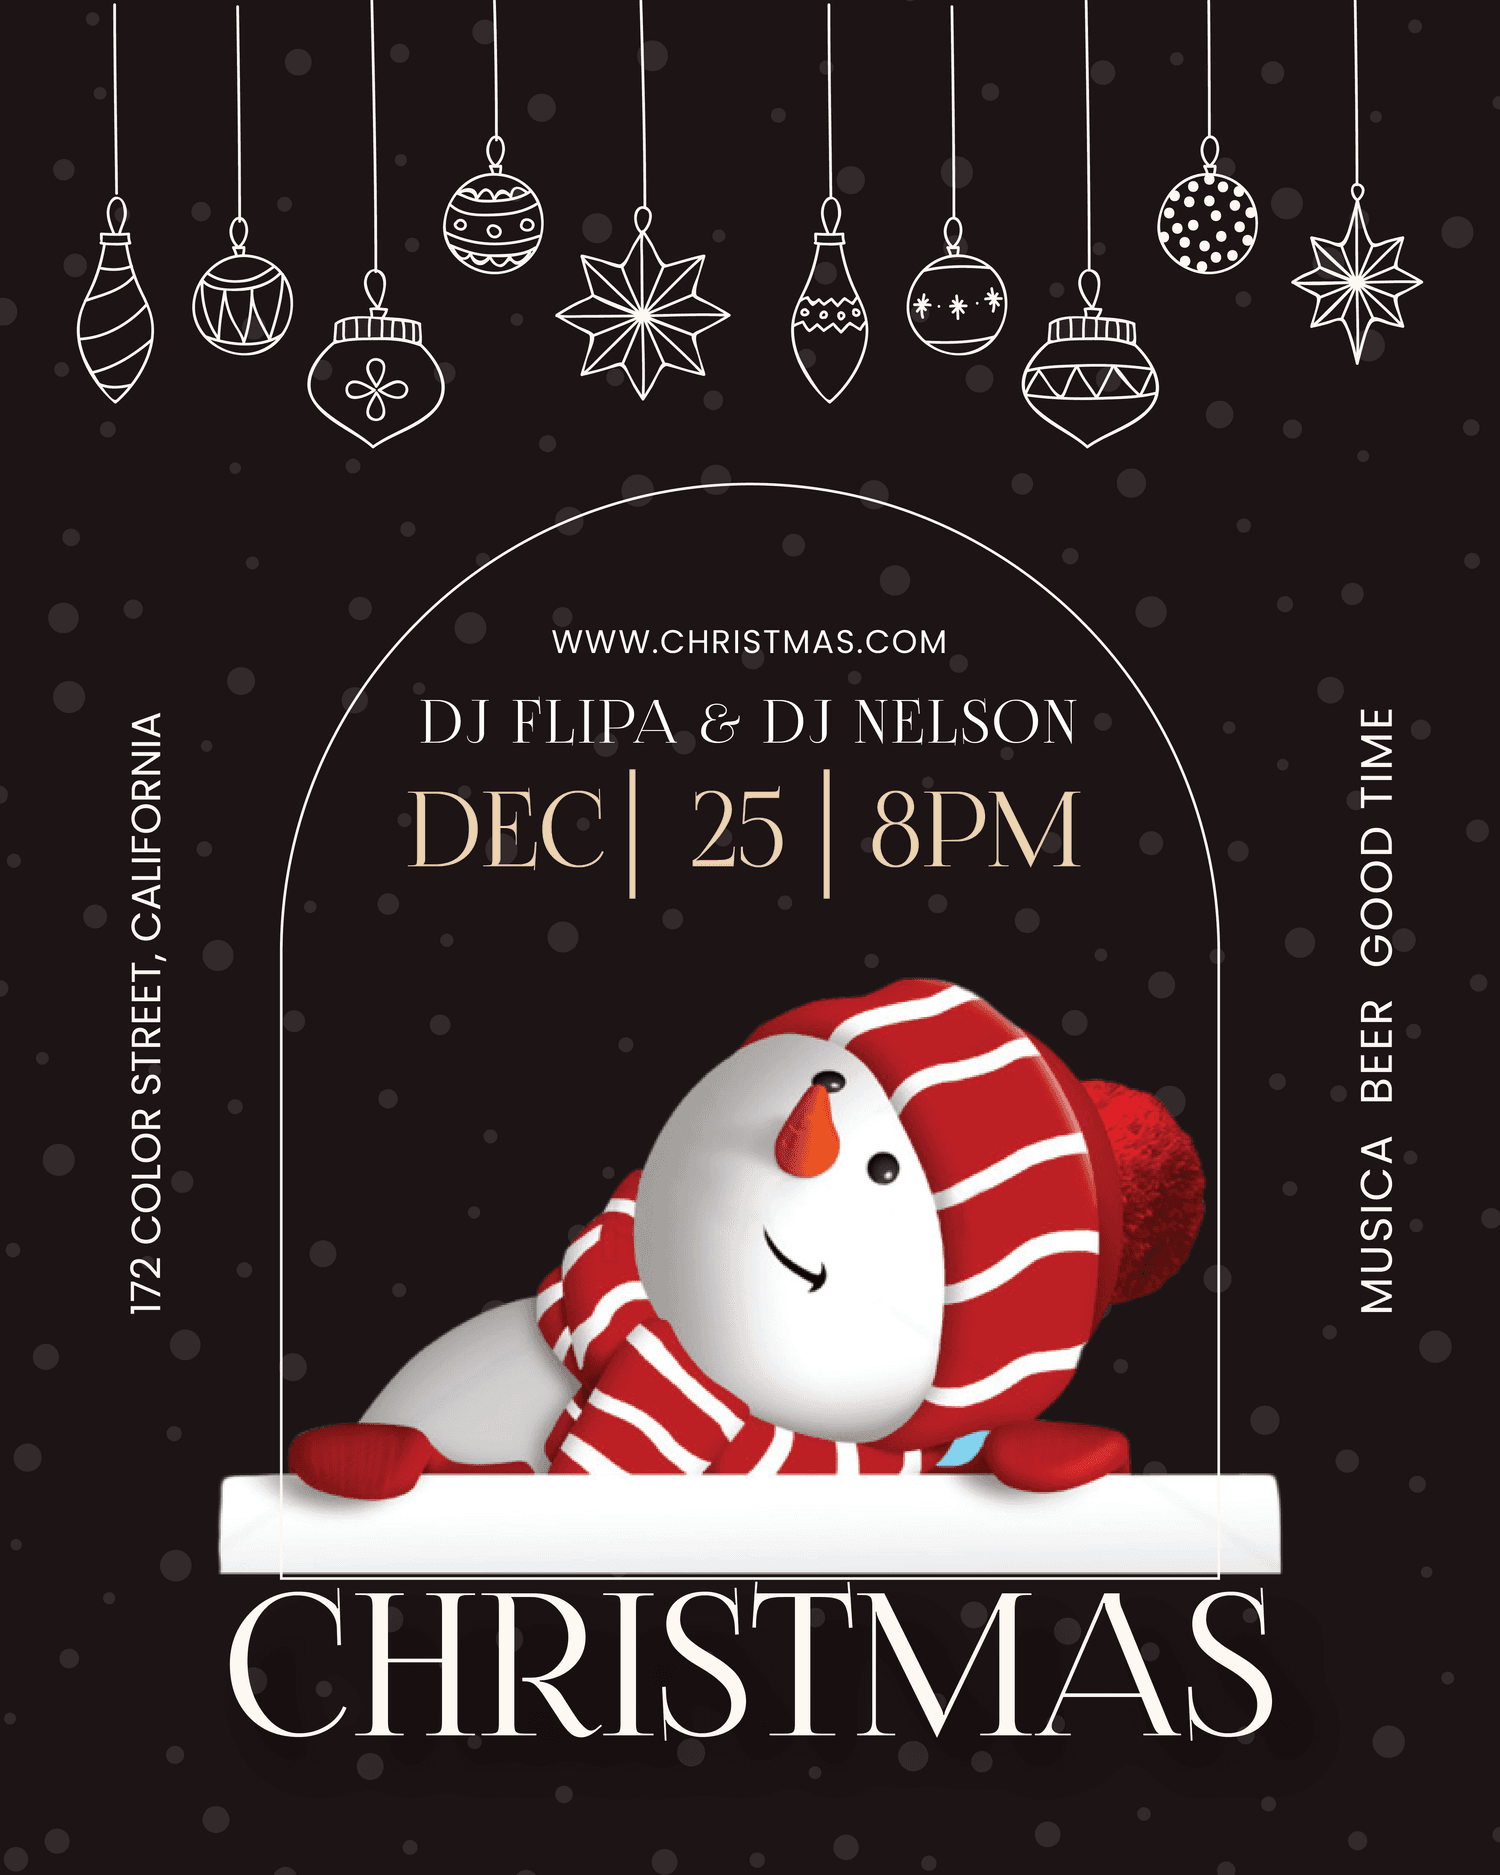 Christmas party poster with snowman on black background 